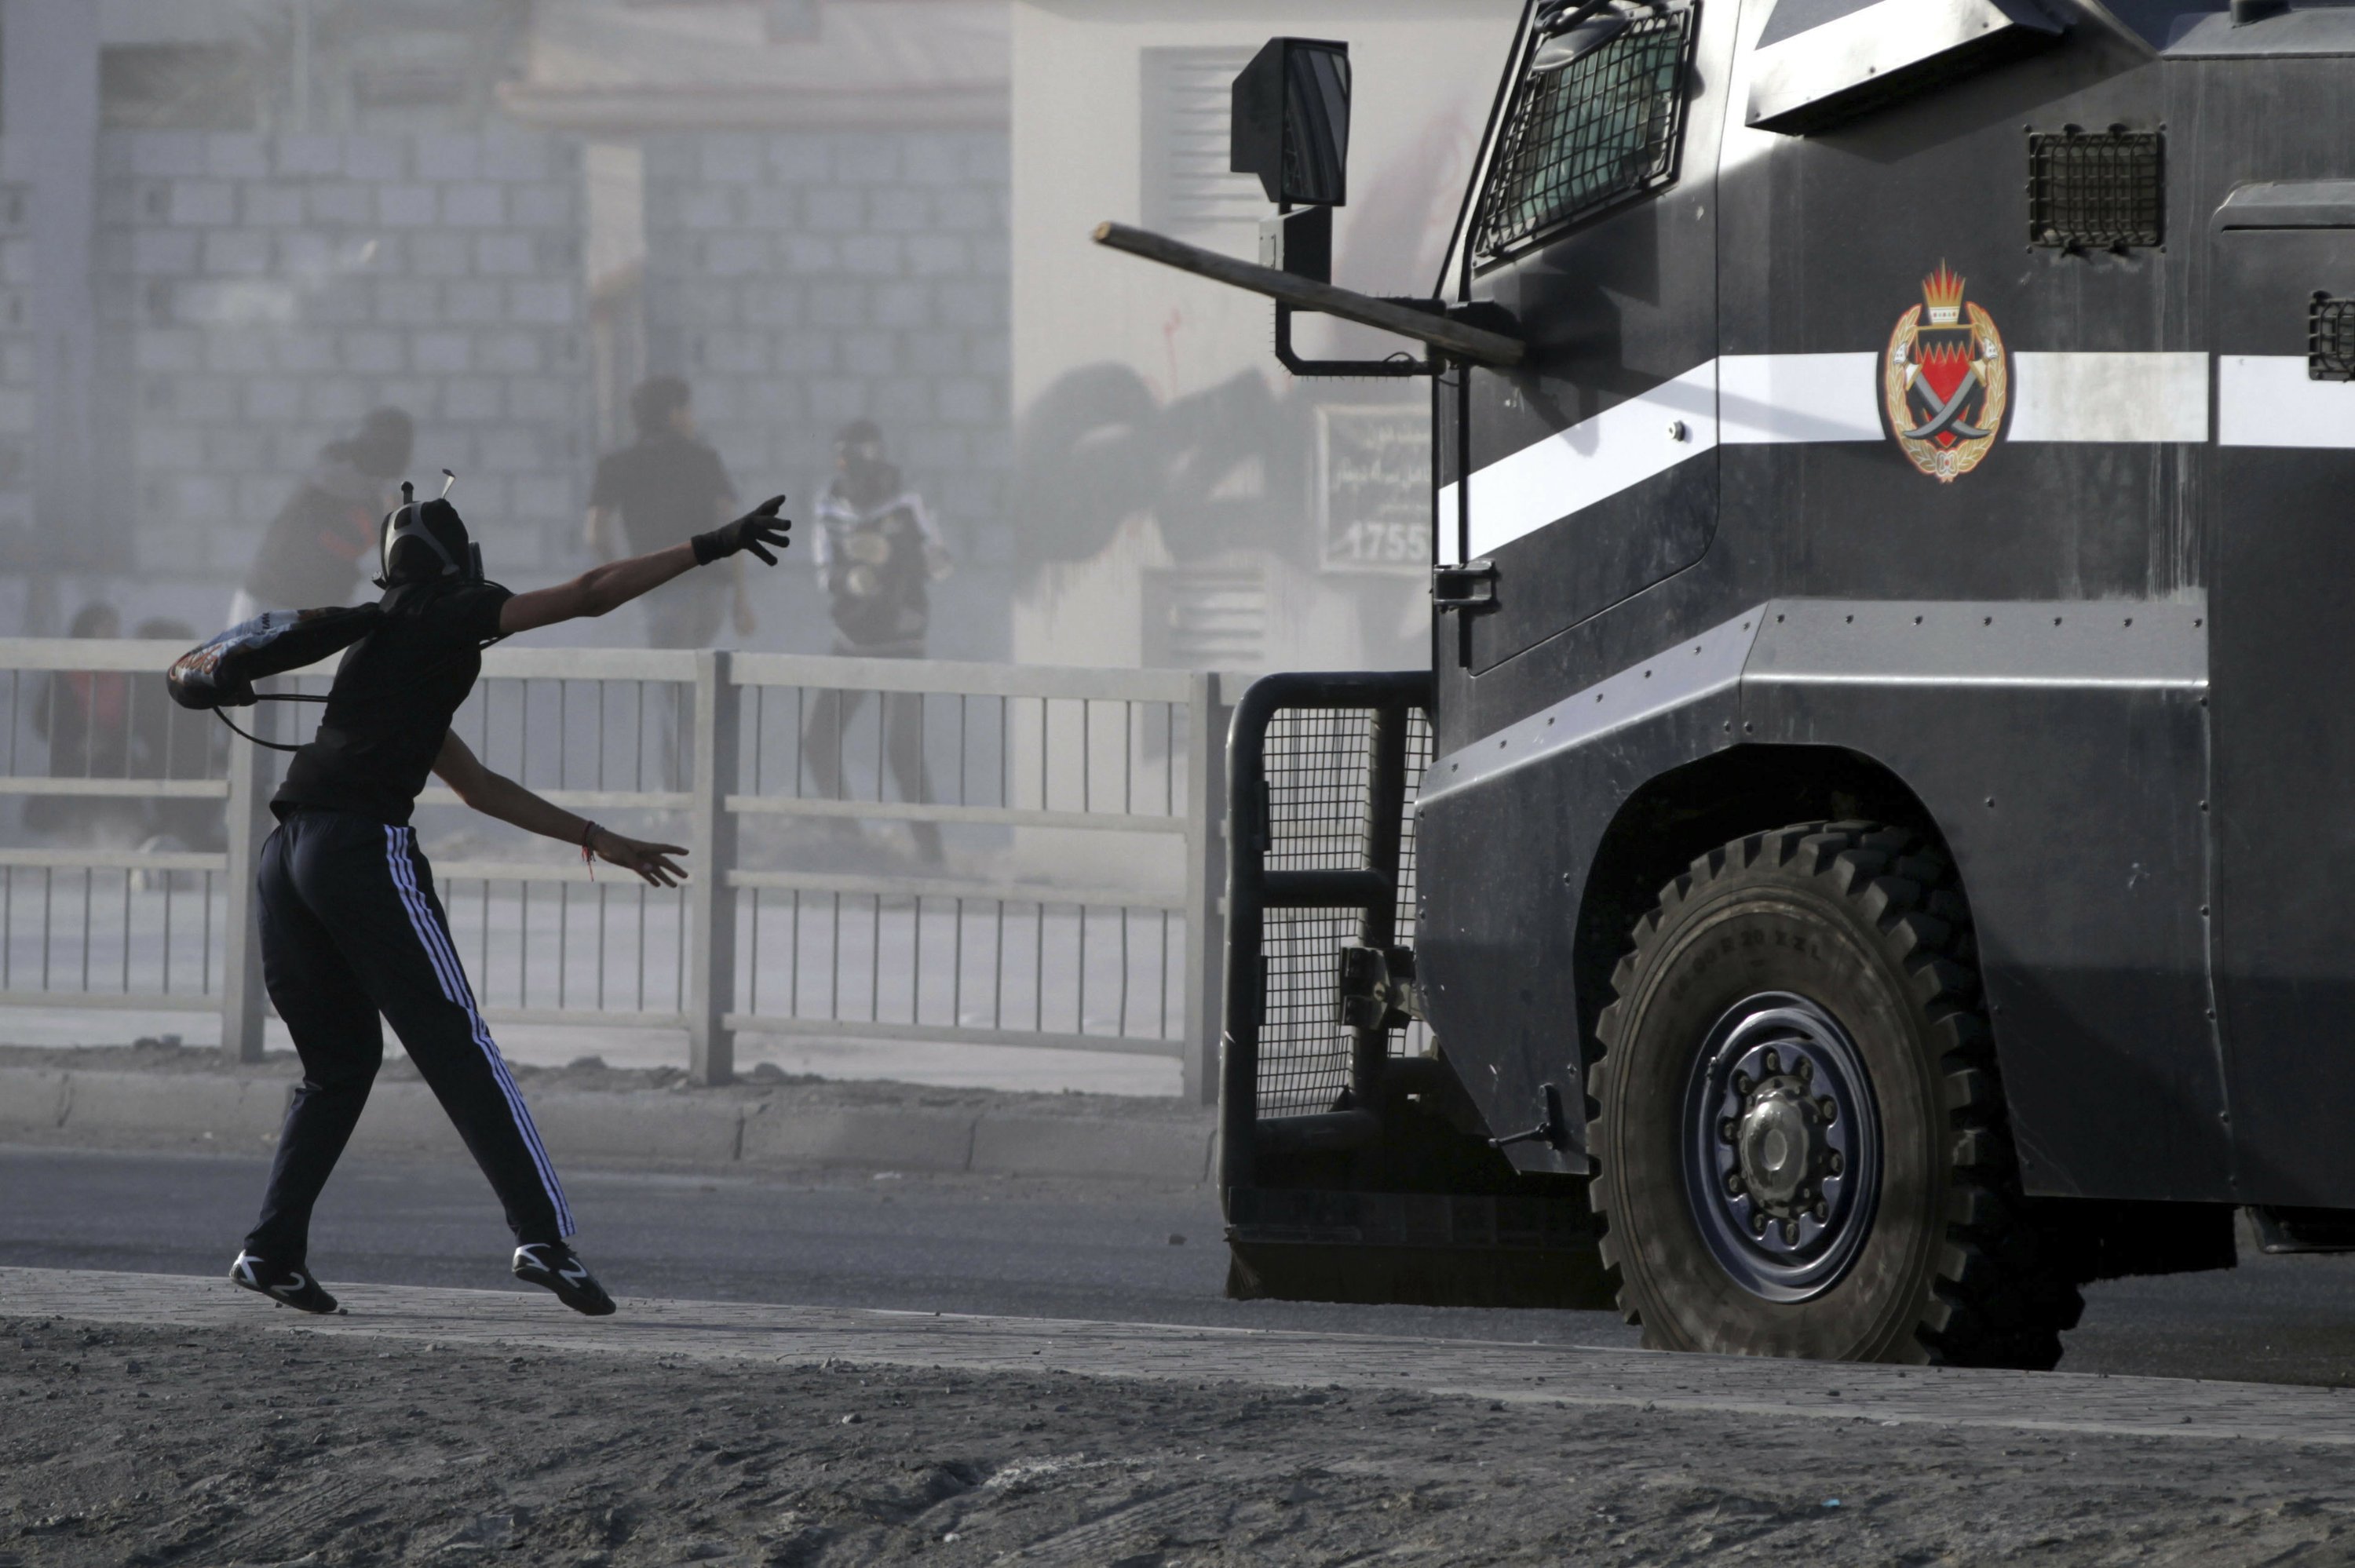 A decade after the 2011 protests, Bahrain suppresses all dissidents